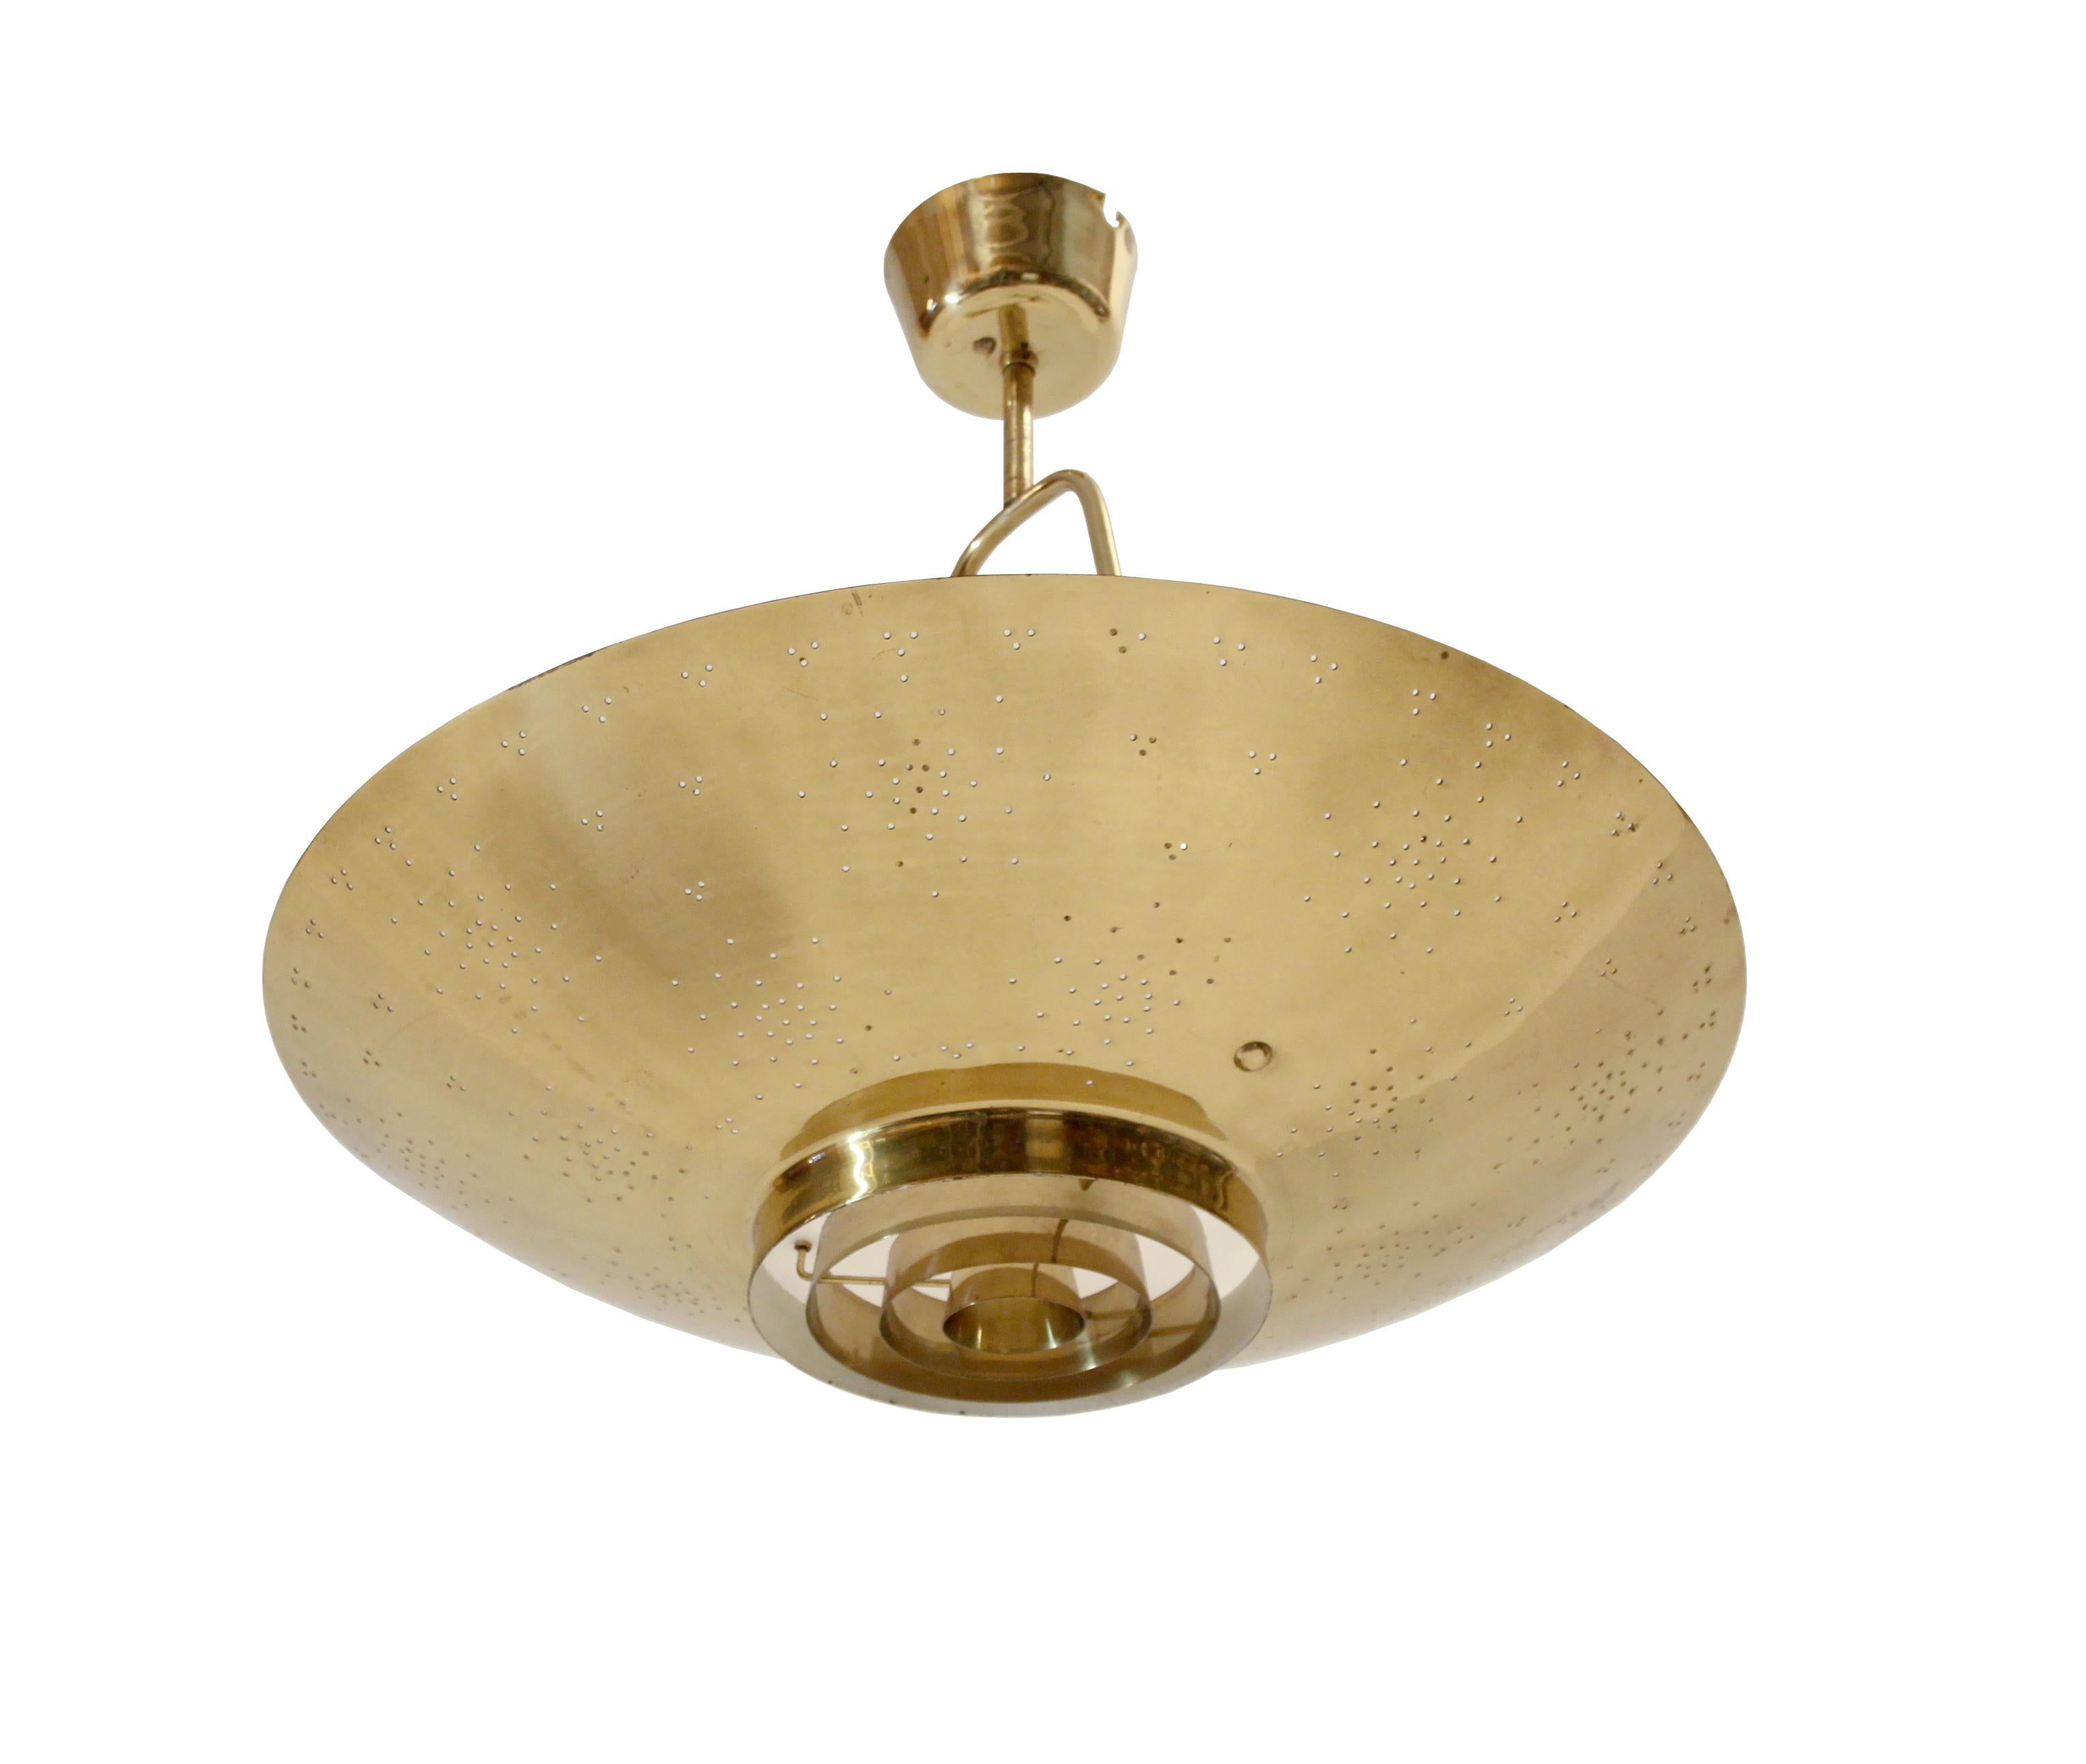 Wonderful, decorative and iconic Scandinavian ceiling light in brass. Designed and Paavo Tynell for Taito in 1950 and made in Norway on licence/permit by Arnold Wiig's Fabrikker from circa 1950s second half. This lamp is called the United Nations